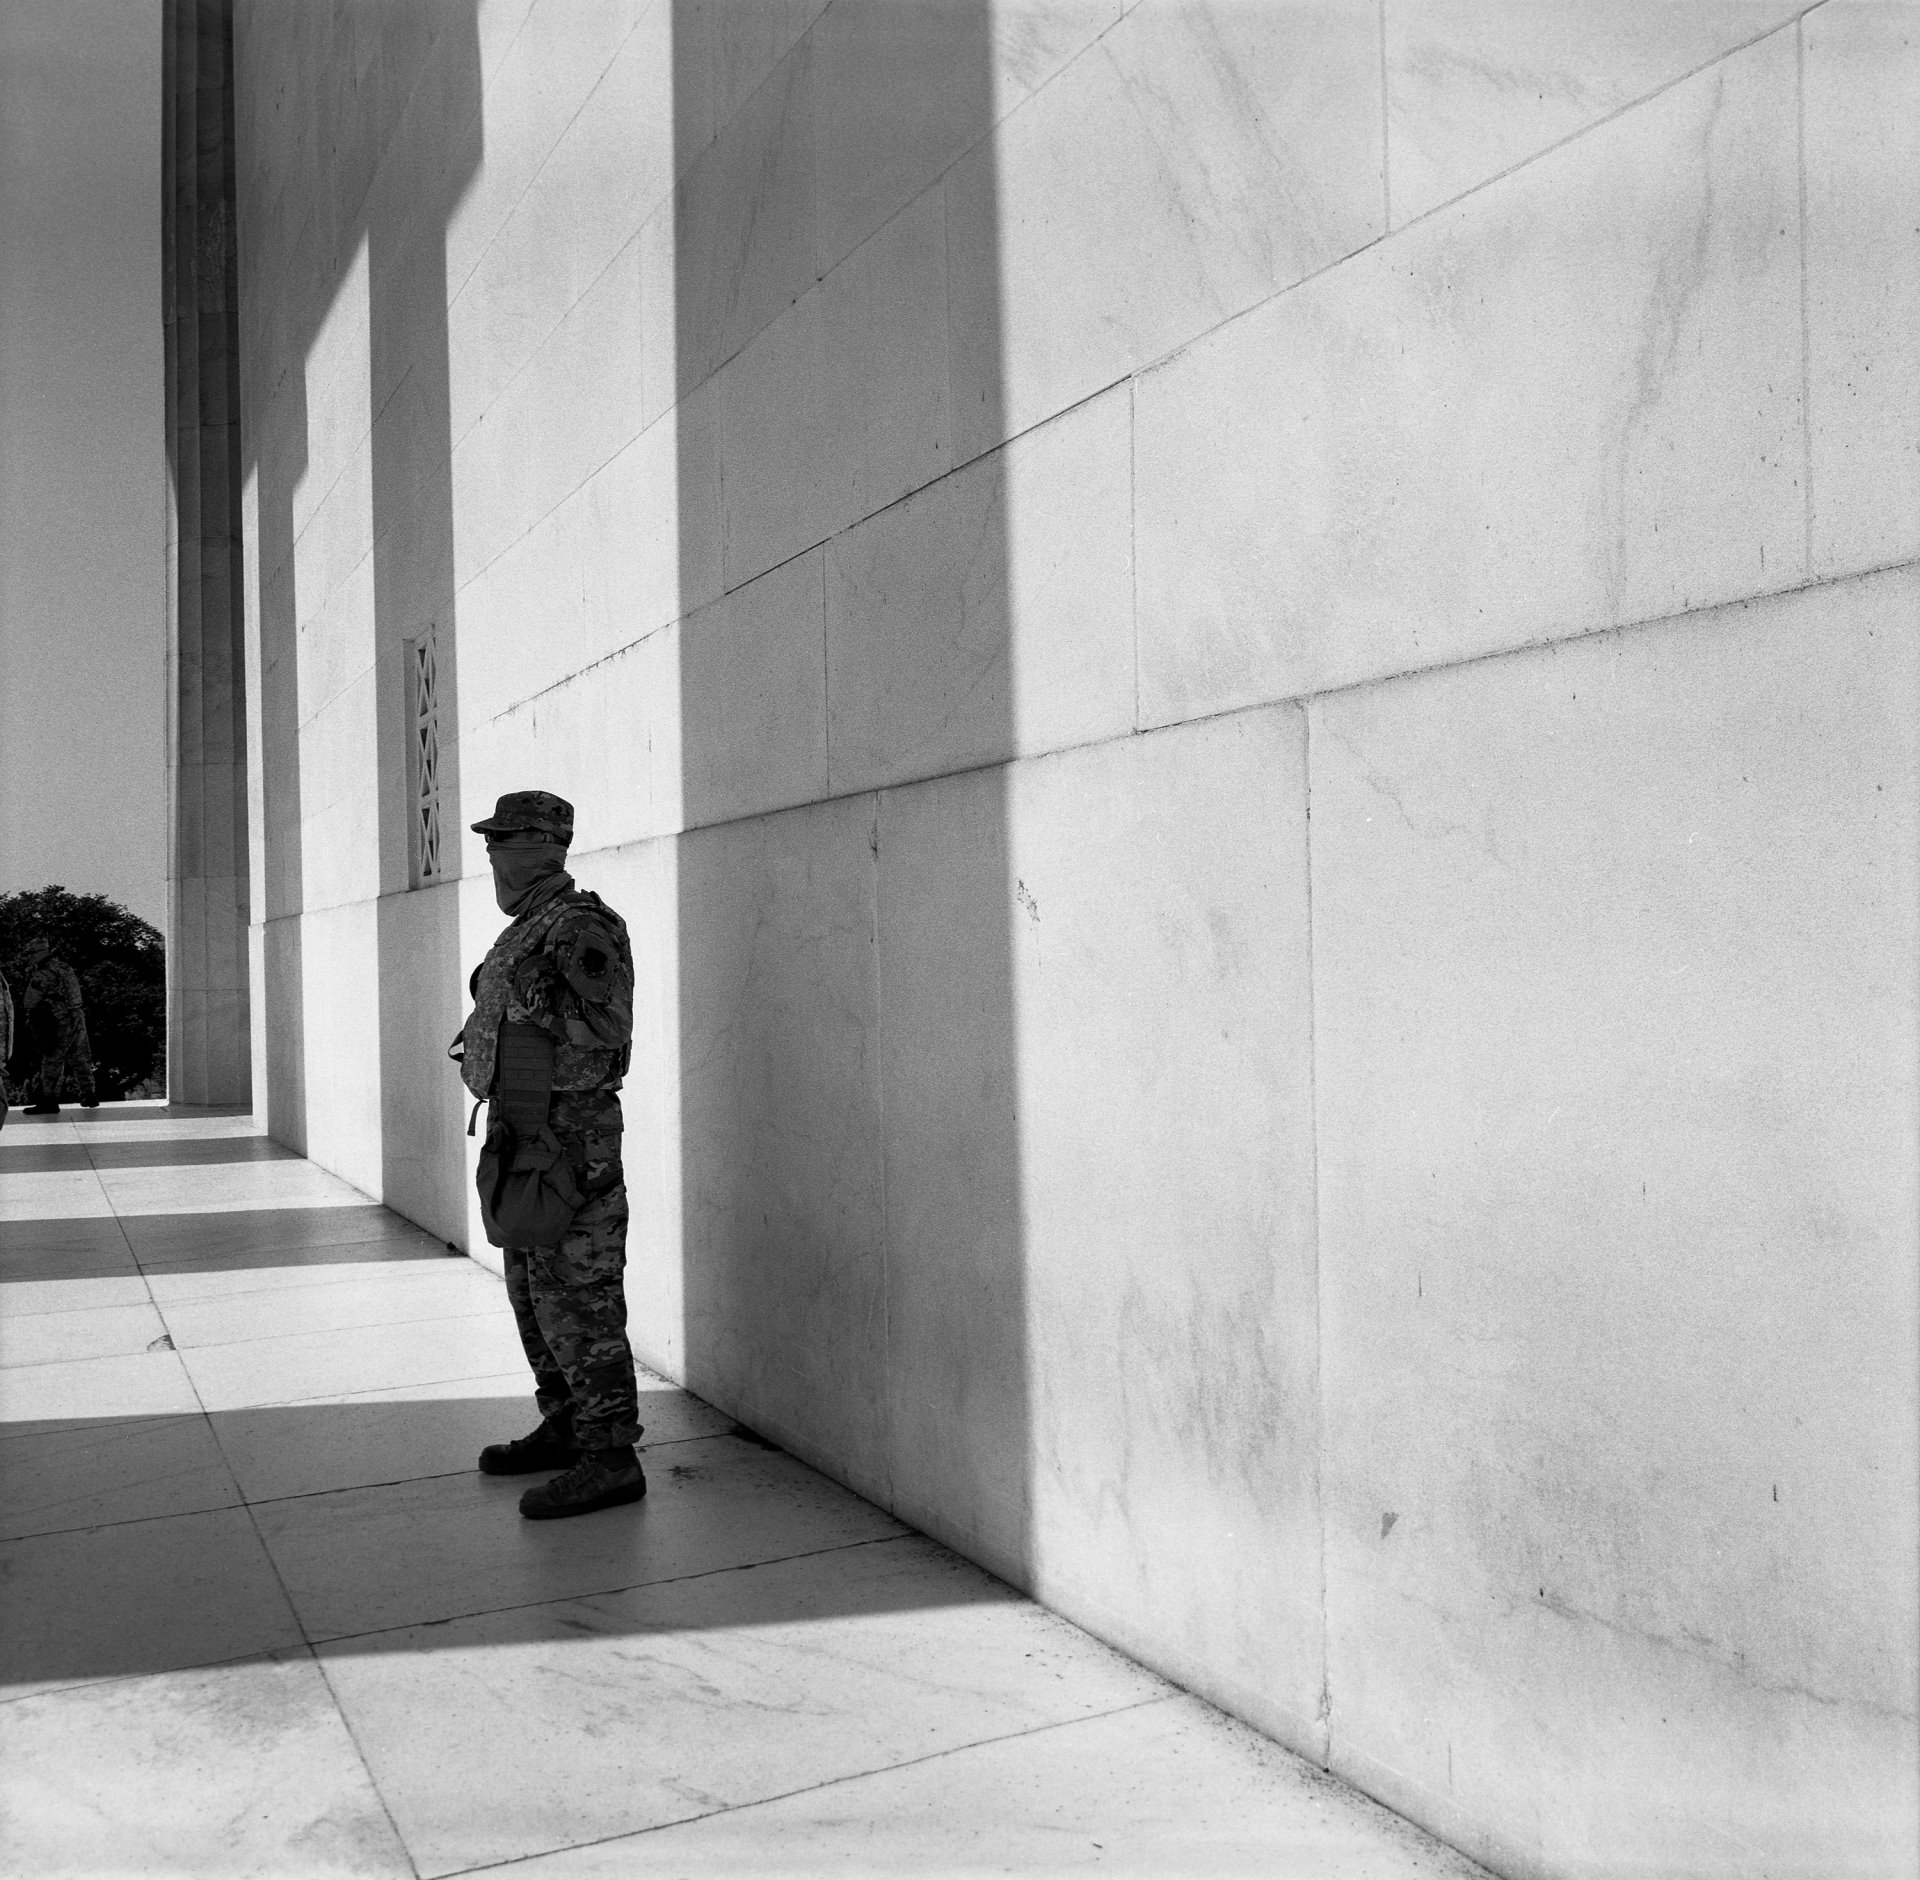 A member of the Washington DC National Guard stands in the shadow of one of the pillars of the Lincoln Memorial, in Washington DC, USA. The White House mobilized the National Guard and numerous federal and local law enforcement officers during growing protests related to the murder of George Floyd, a 46-year-old Black man, who died while being arrested by Minneapolis police two weeks earlier. US Army soldiers were moved to bases near Washington DC and put on alert, but not deployed.&nbsp;